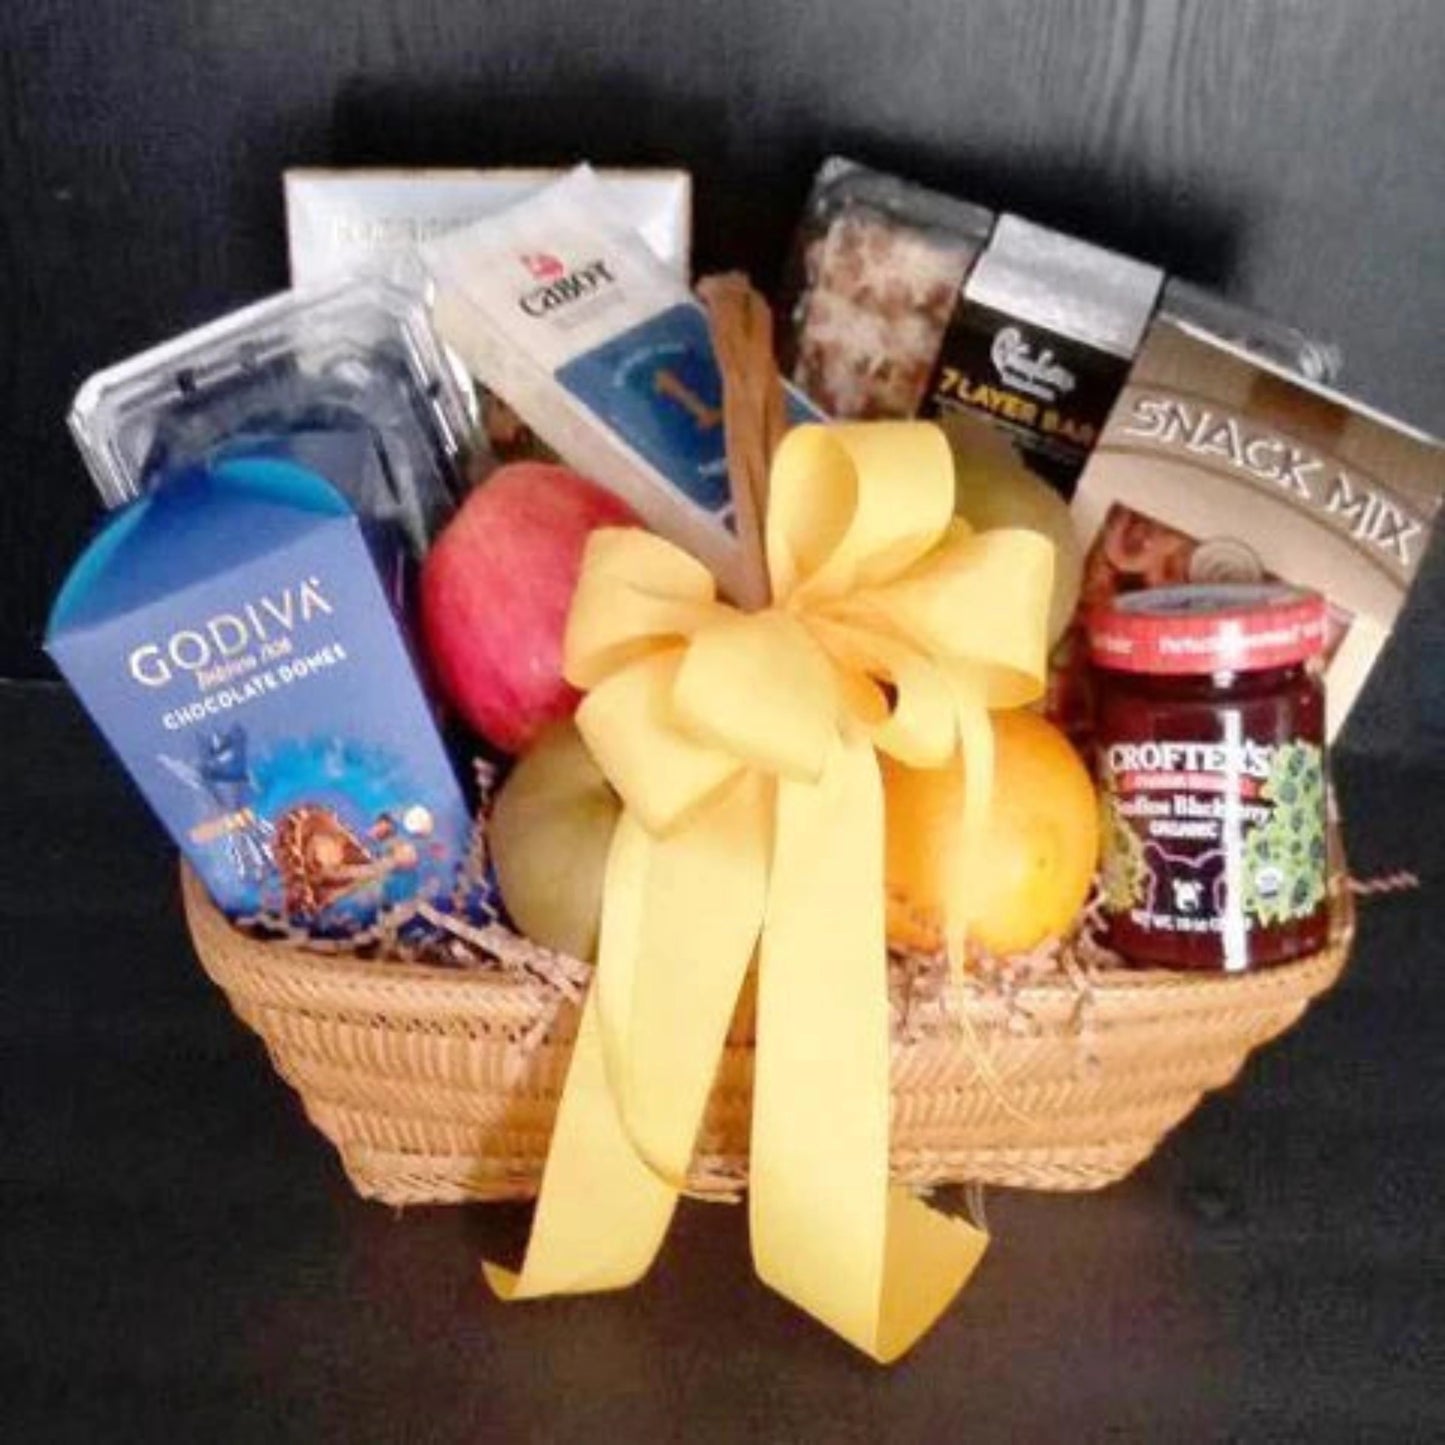 Fruit and snacks gift basket, gift this fruit gift basket to show thanks and appreciation. Fruits, Cheese, Chocolate Crackers and a varieties of snacks are the contents of the gift basket